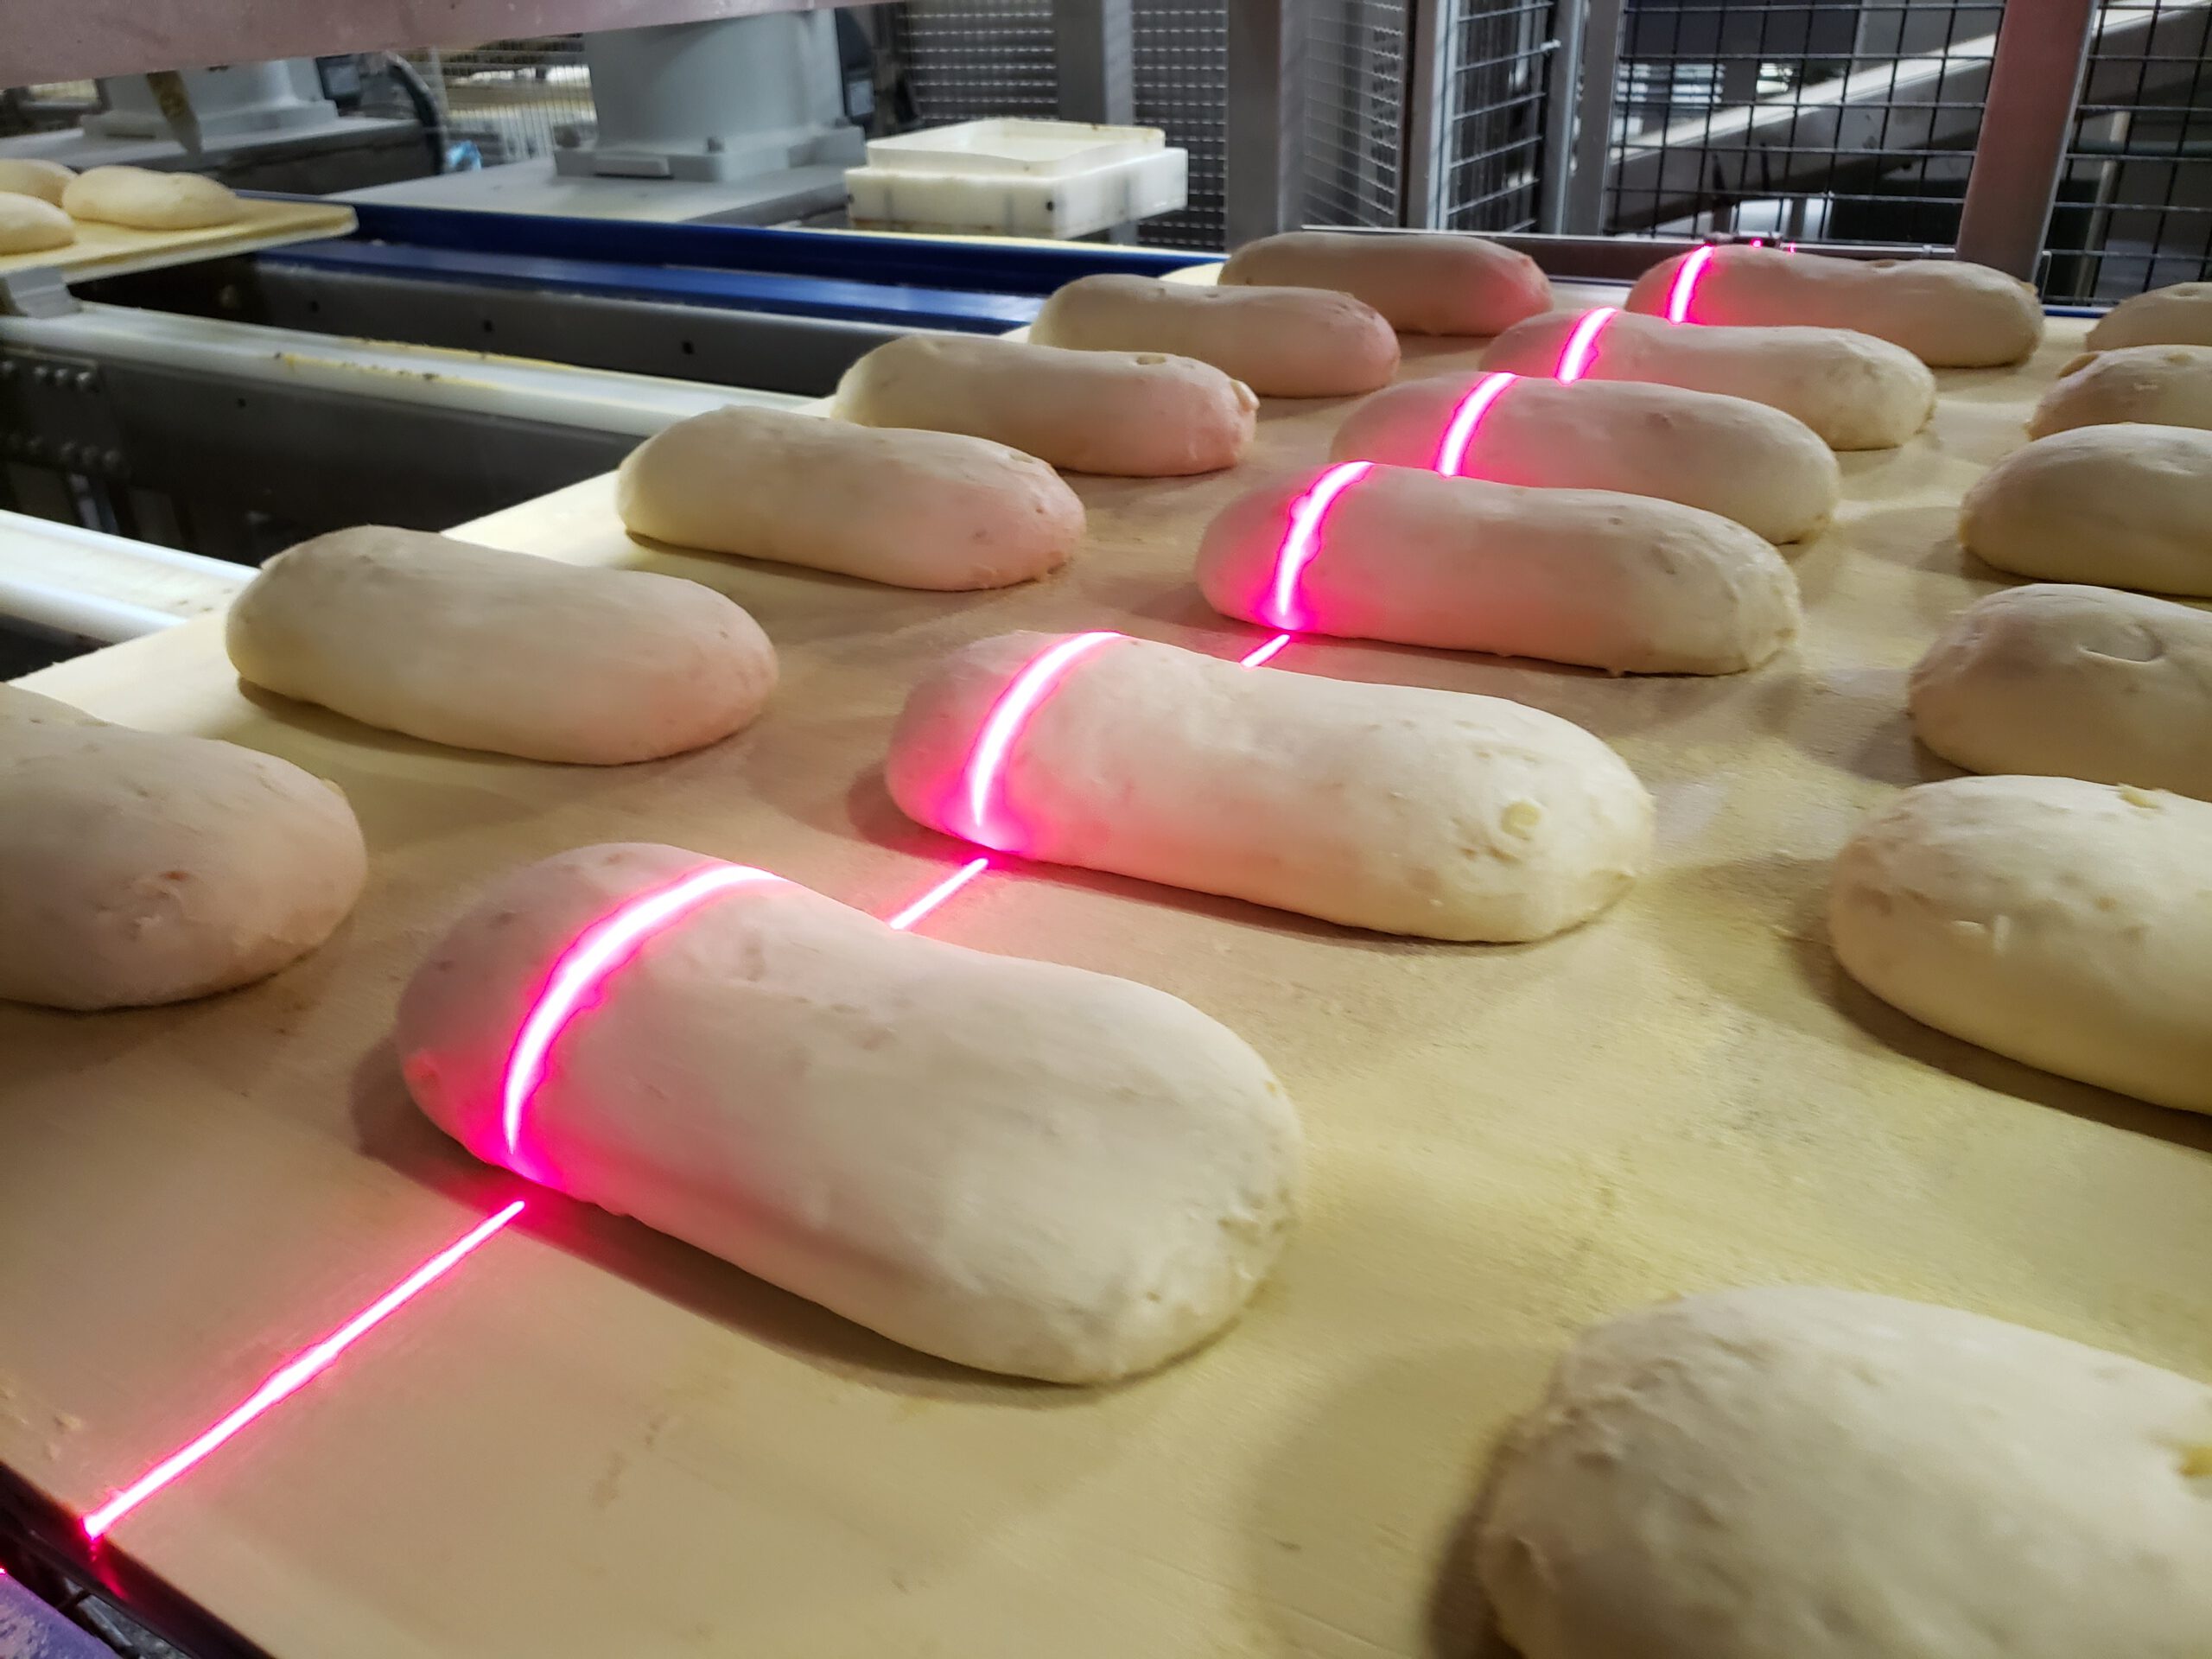 Laser line projected across bread for 3D based Machine vision quality control